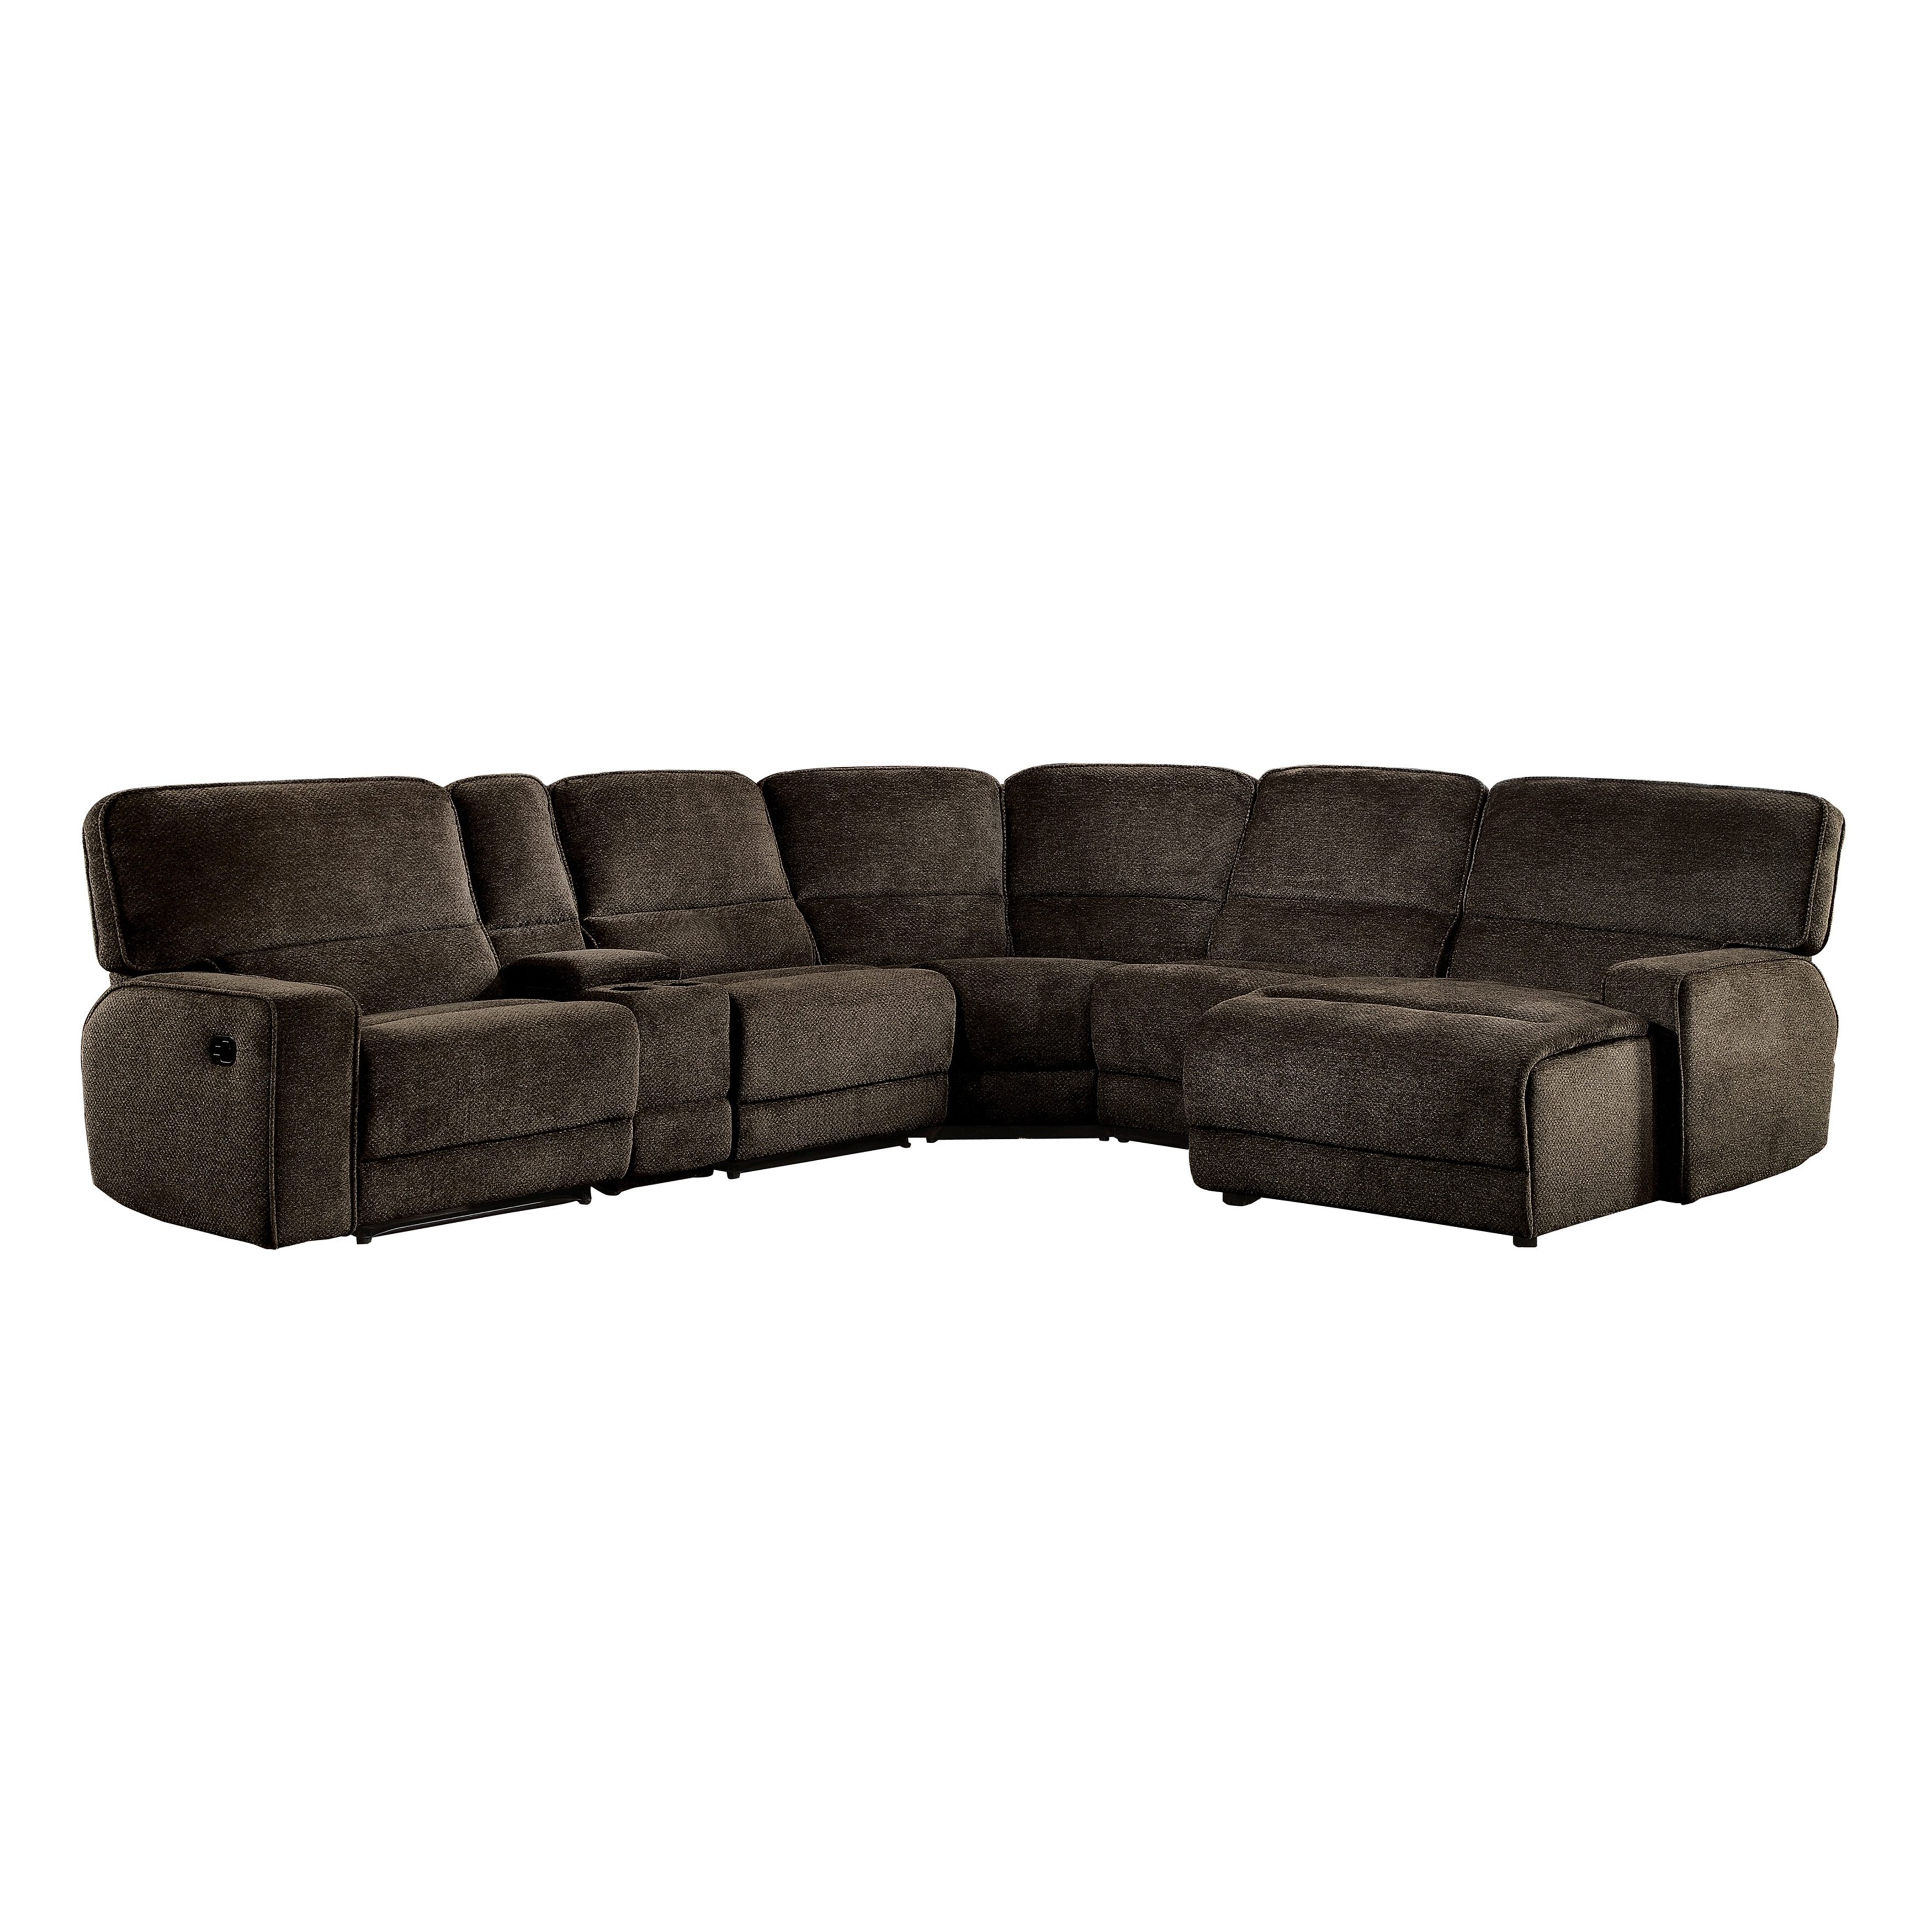 Legrande Modular Reclining Sectional Sofa With Right Chaise